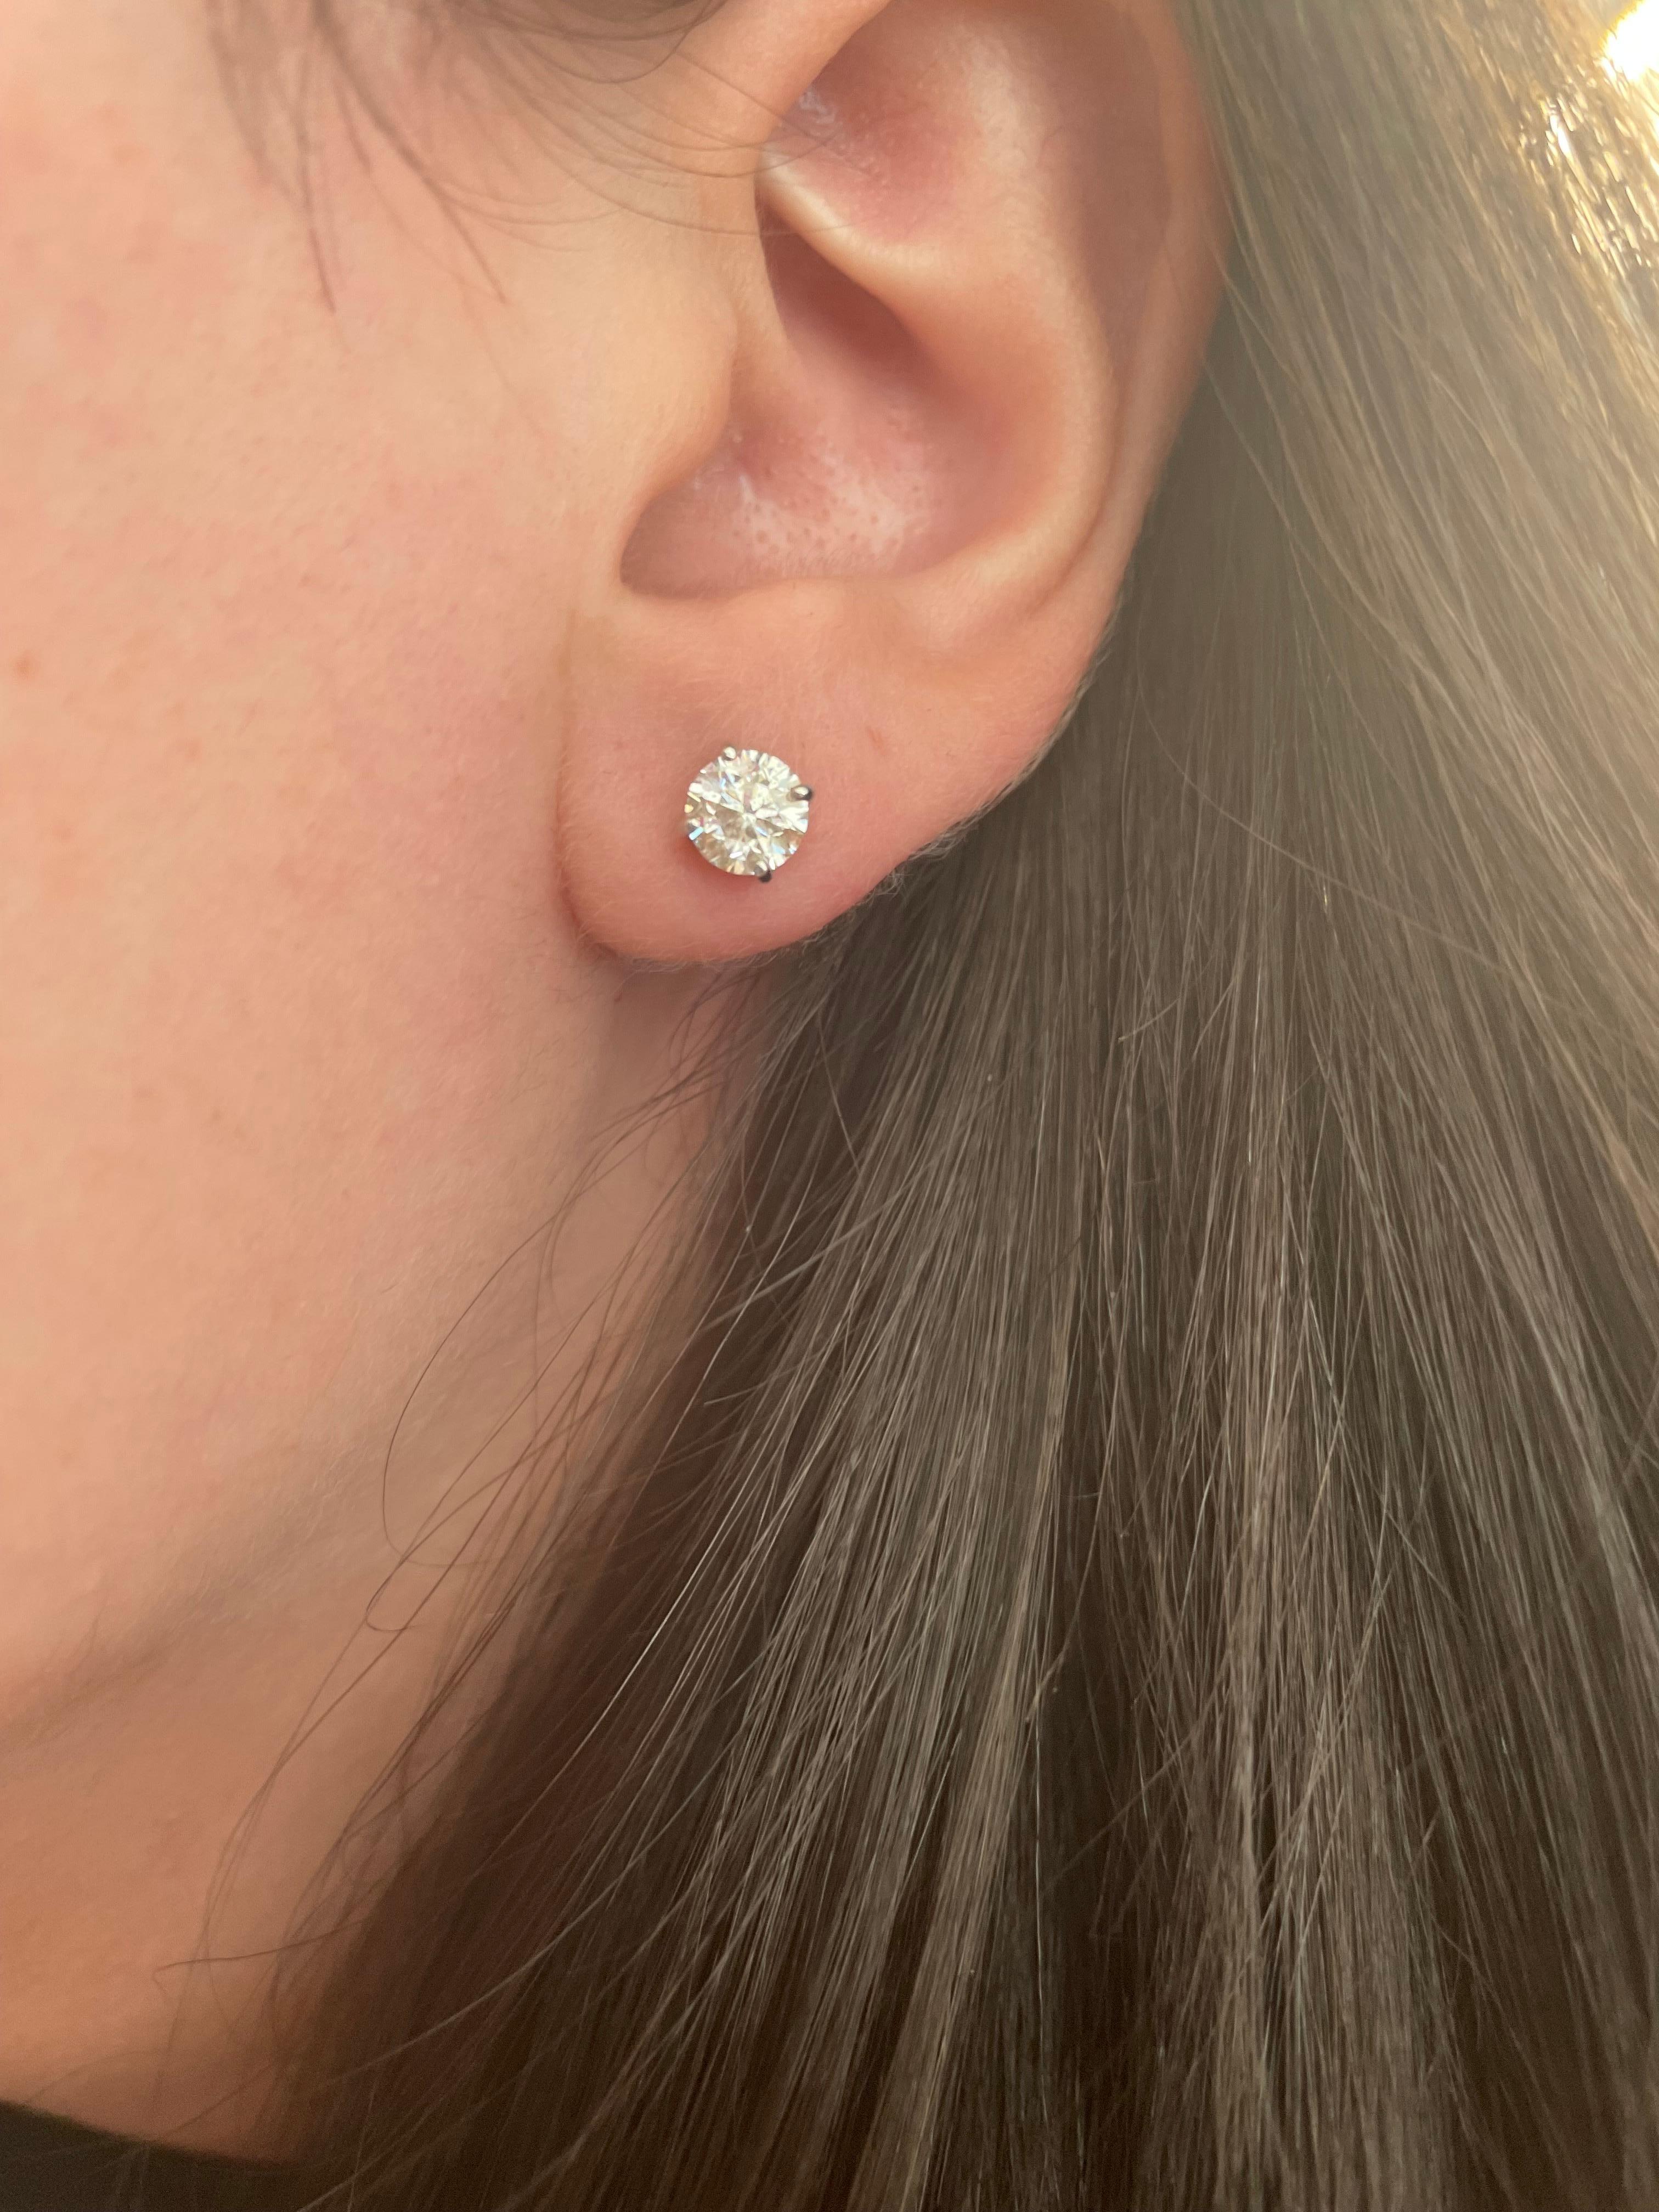 Classic diamond stud earrings. By Alexander Beverly Hills.
Two round brilliant diamonds 1.46 carats total. Approximately G color and SI clarity. Four prong set, 14k white gold. 
Accommodated with an up to date appraisal by a GIA G.G. upon request.